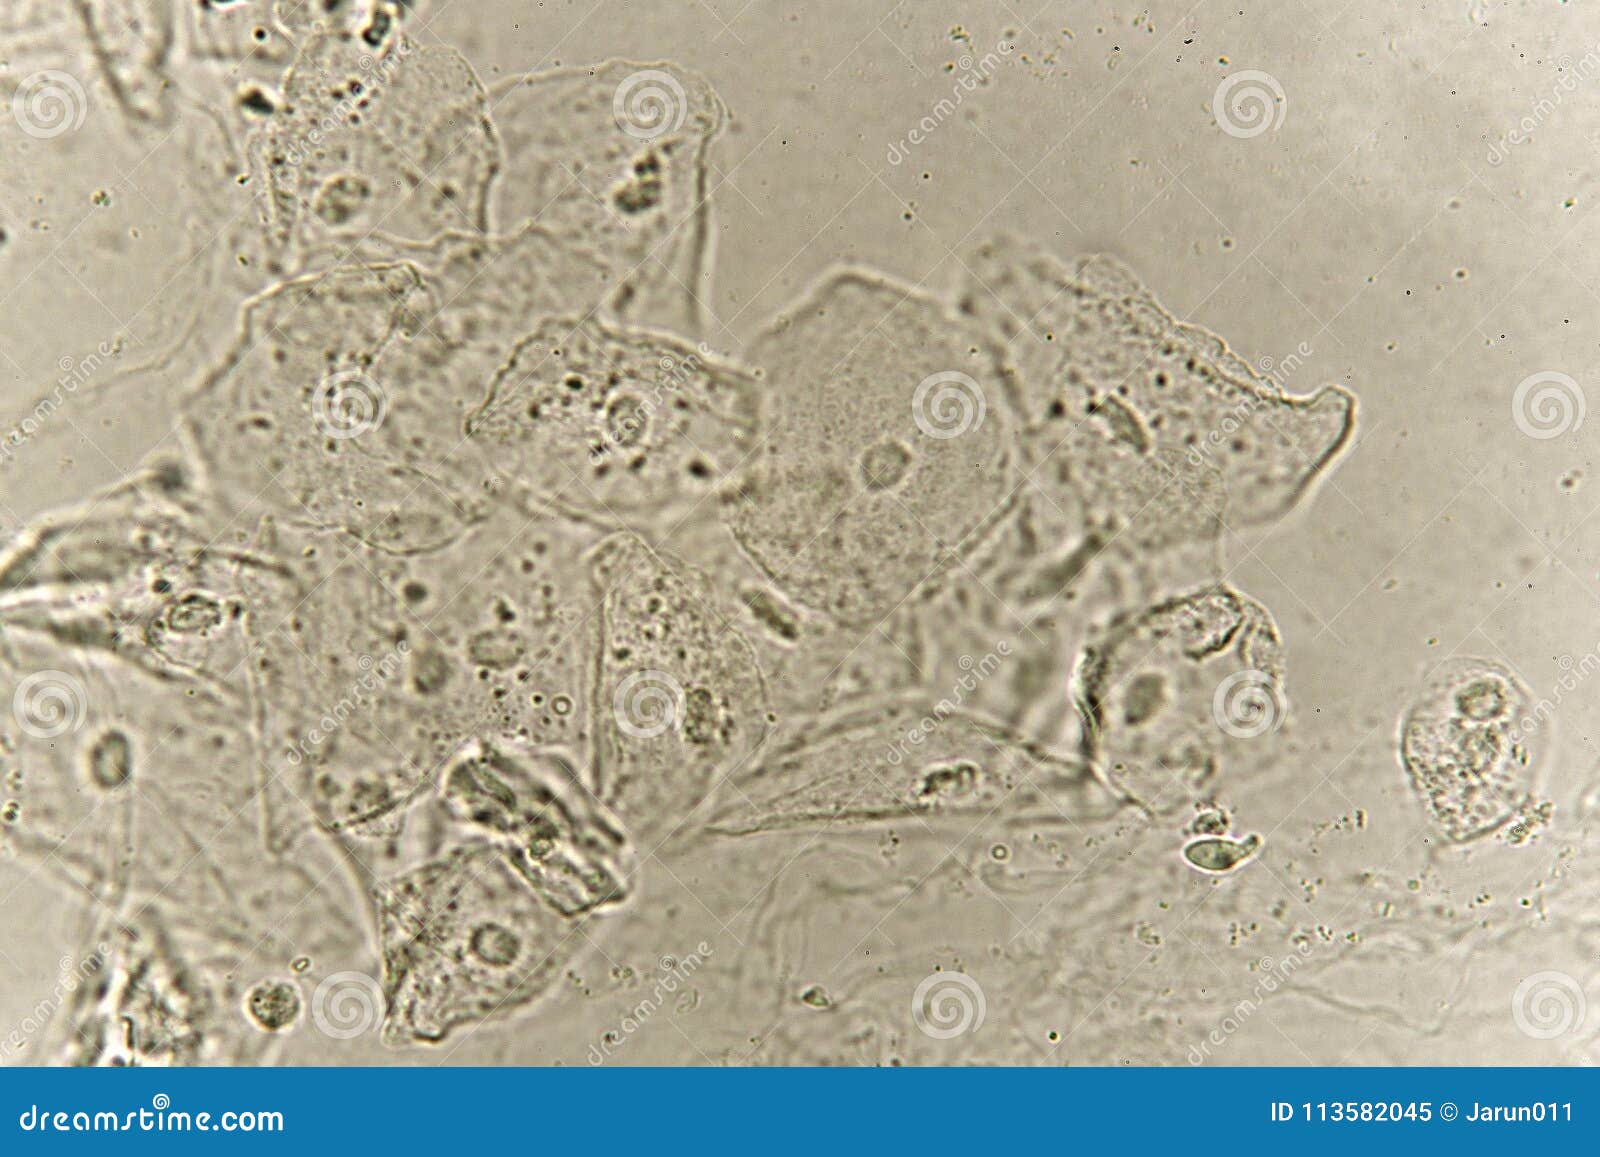 Microscope Transitional Epithelial Cells In Urine - Micropedia